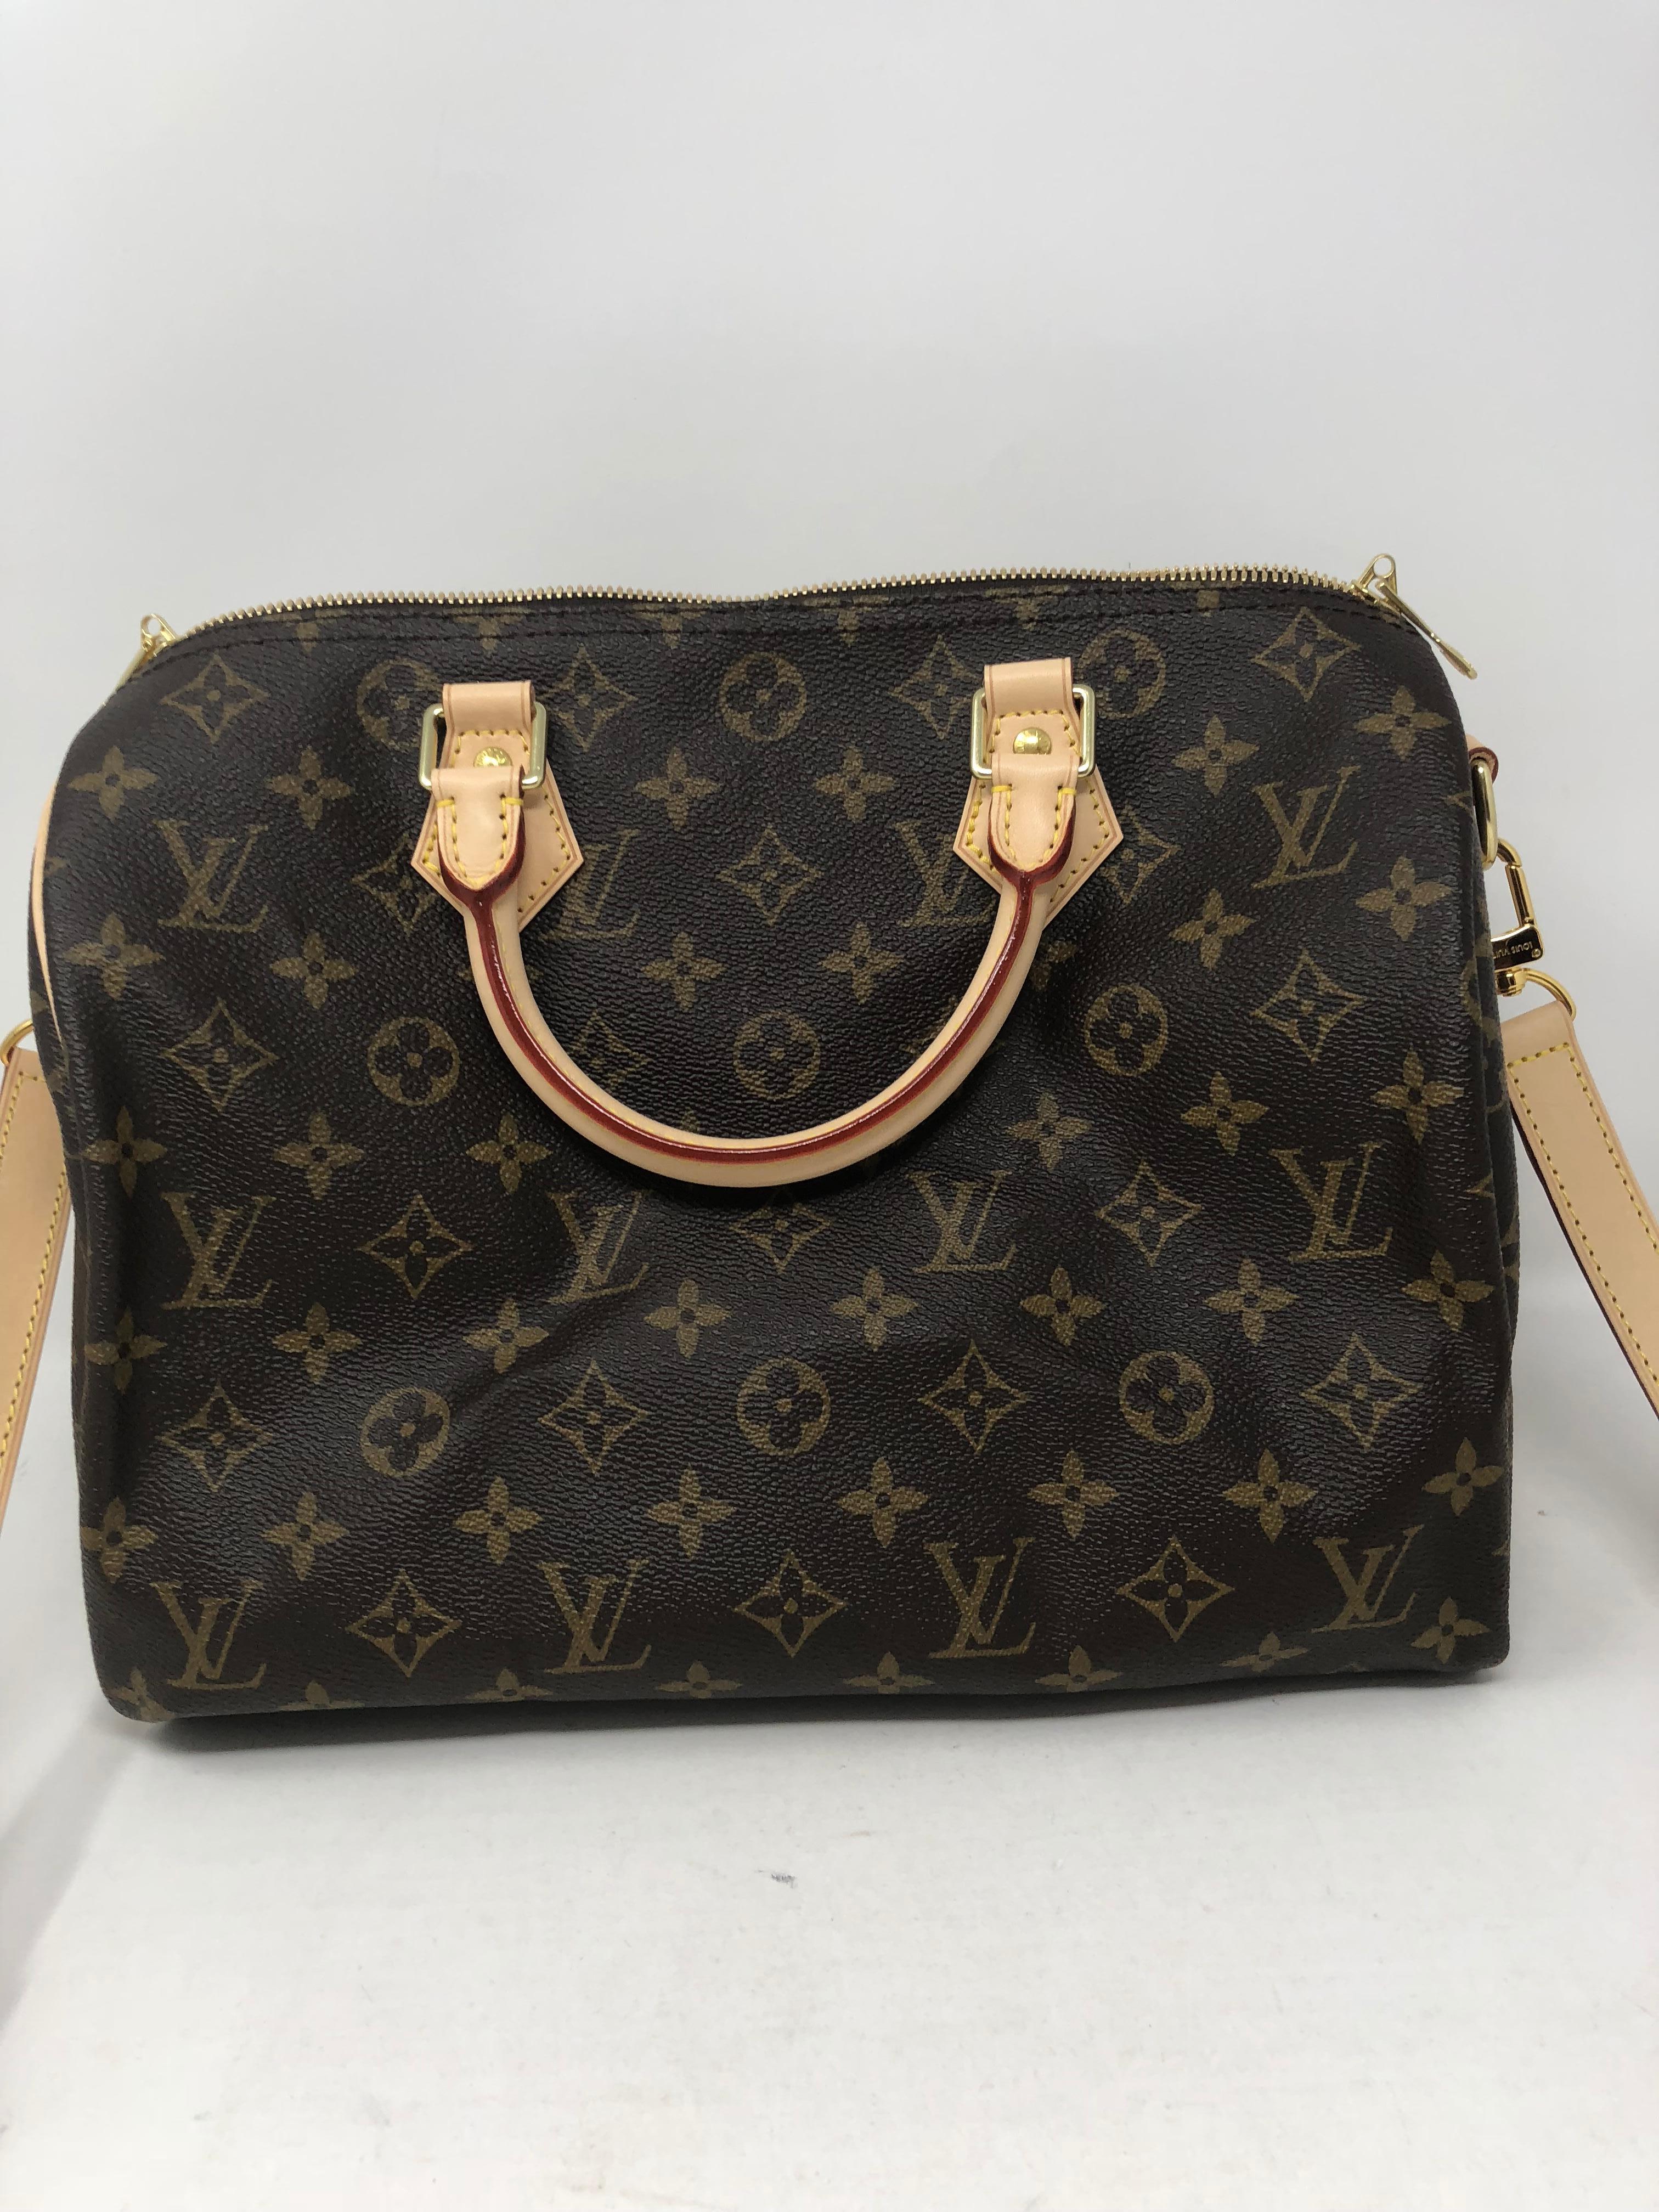 Louis Vuitton Speedy 30 Bandouliere in monogram. Iconic classic with adjustable strap. Can be worn with or without strap. Brand new and never used. Includes original dust cover and box. Guaranteed authentic. 